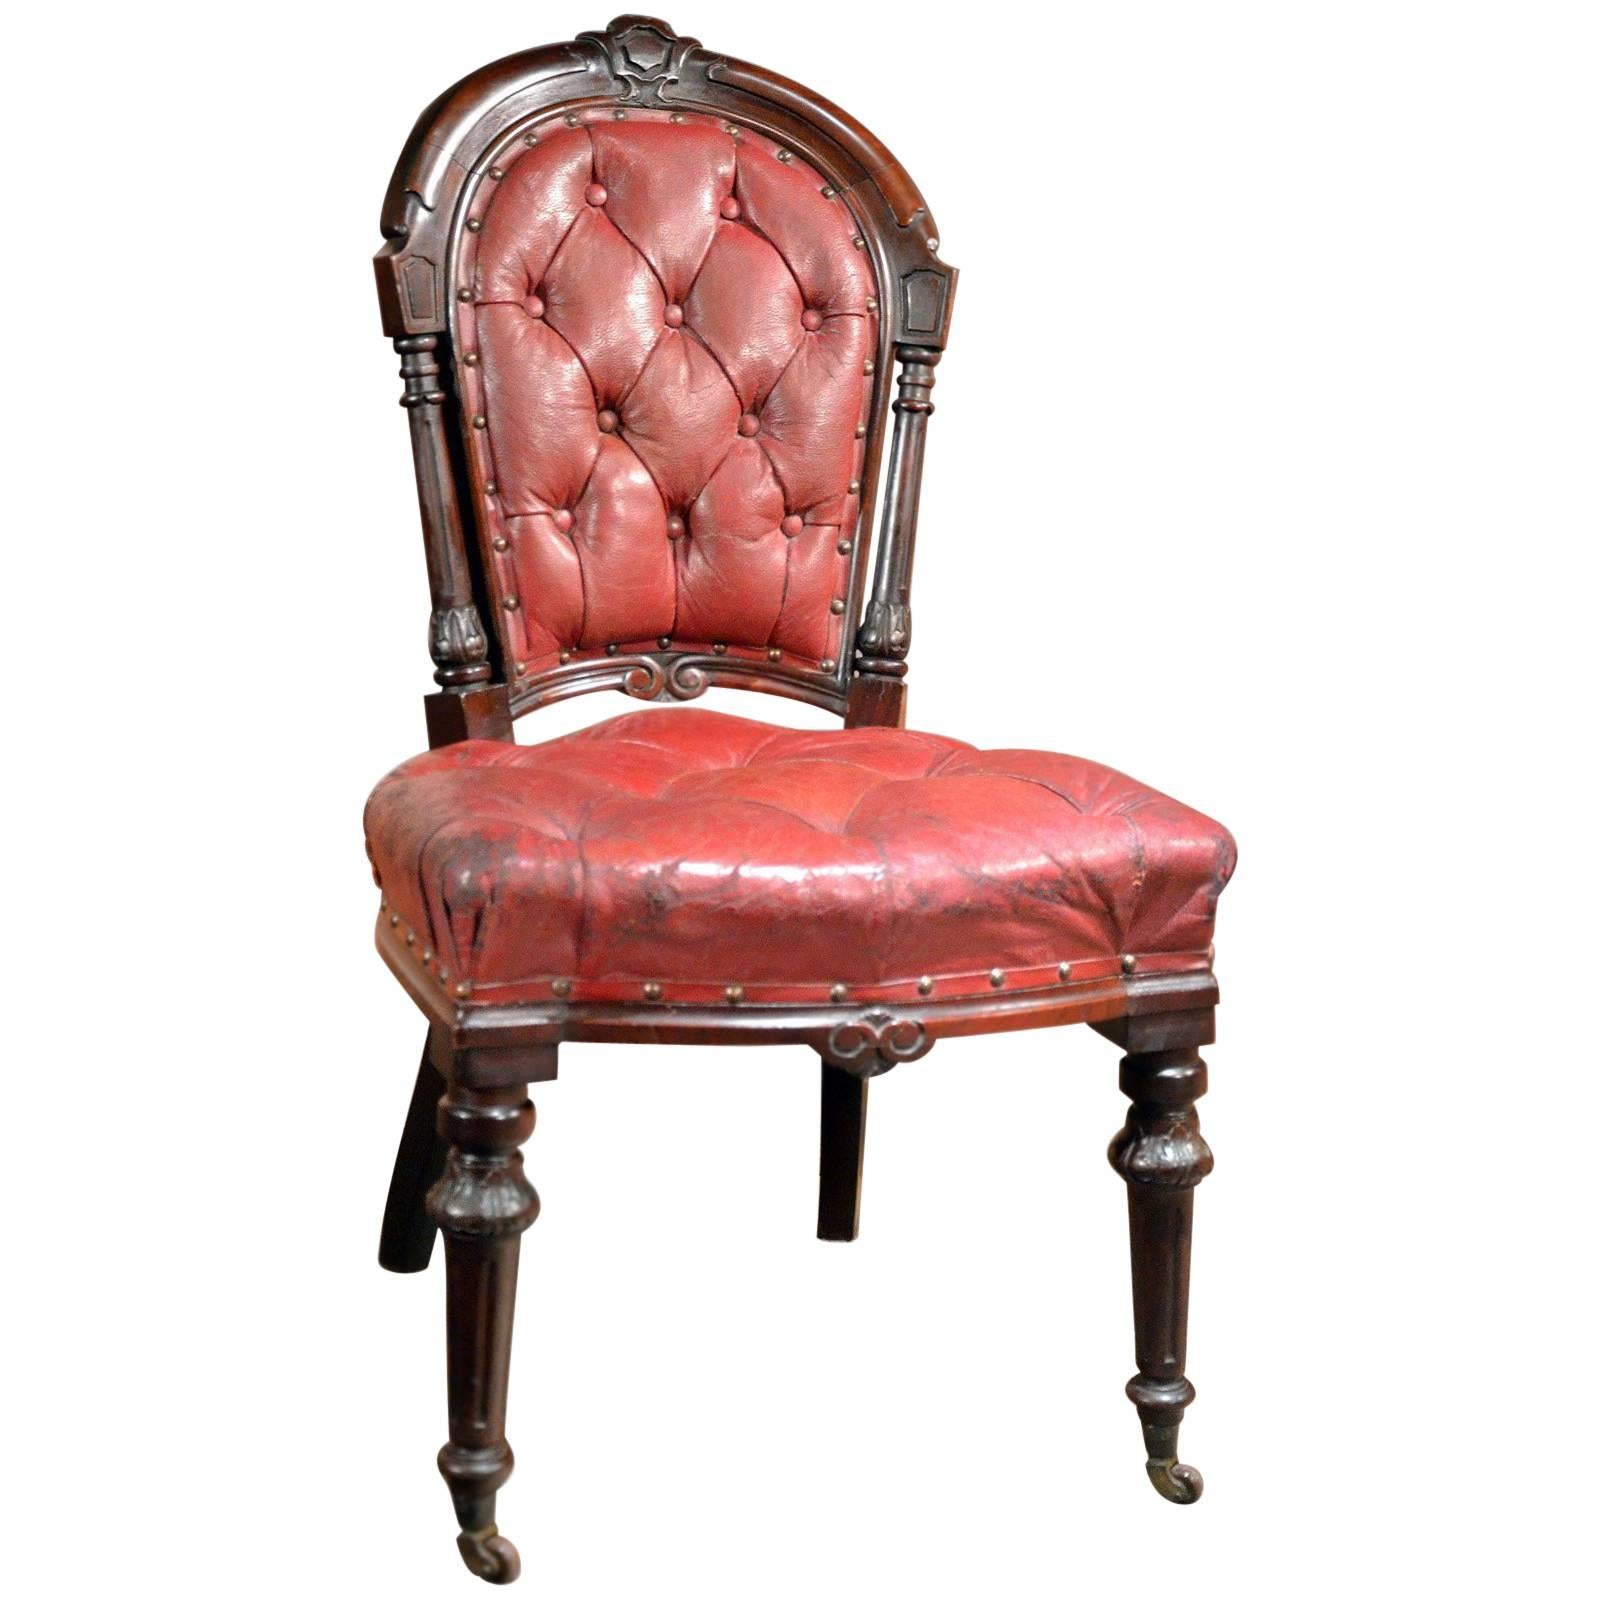 Regency Red Leather Antique Library Chair, circa 1830